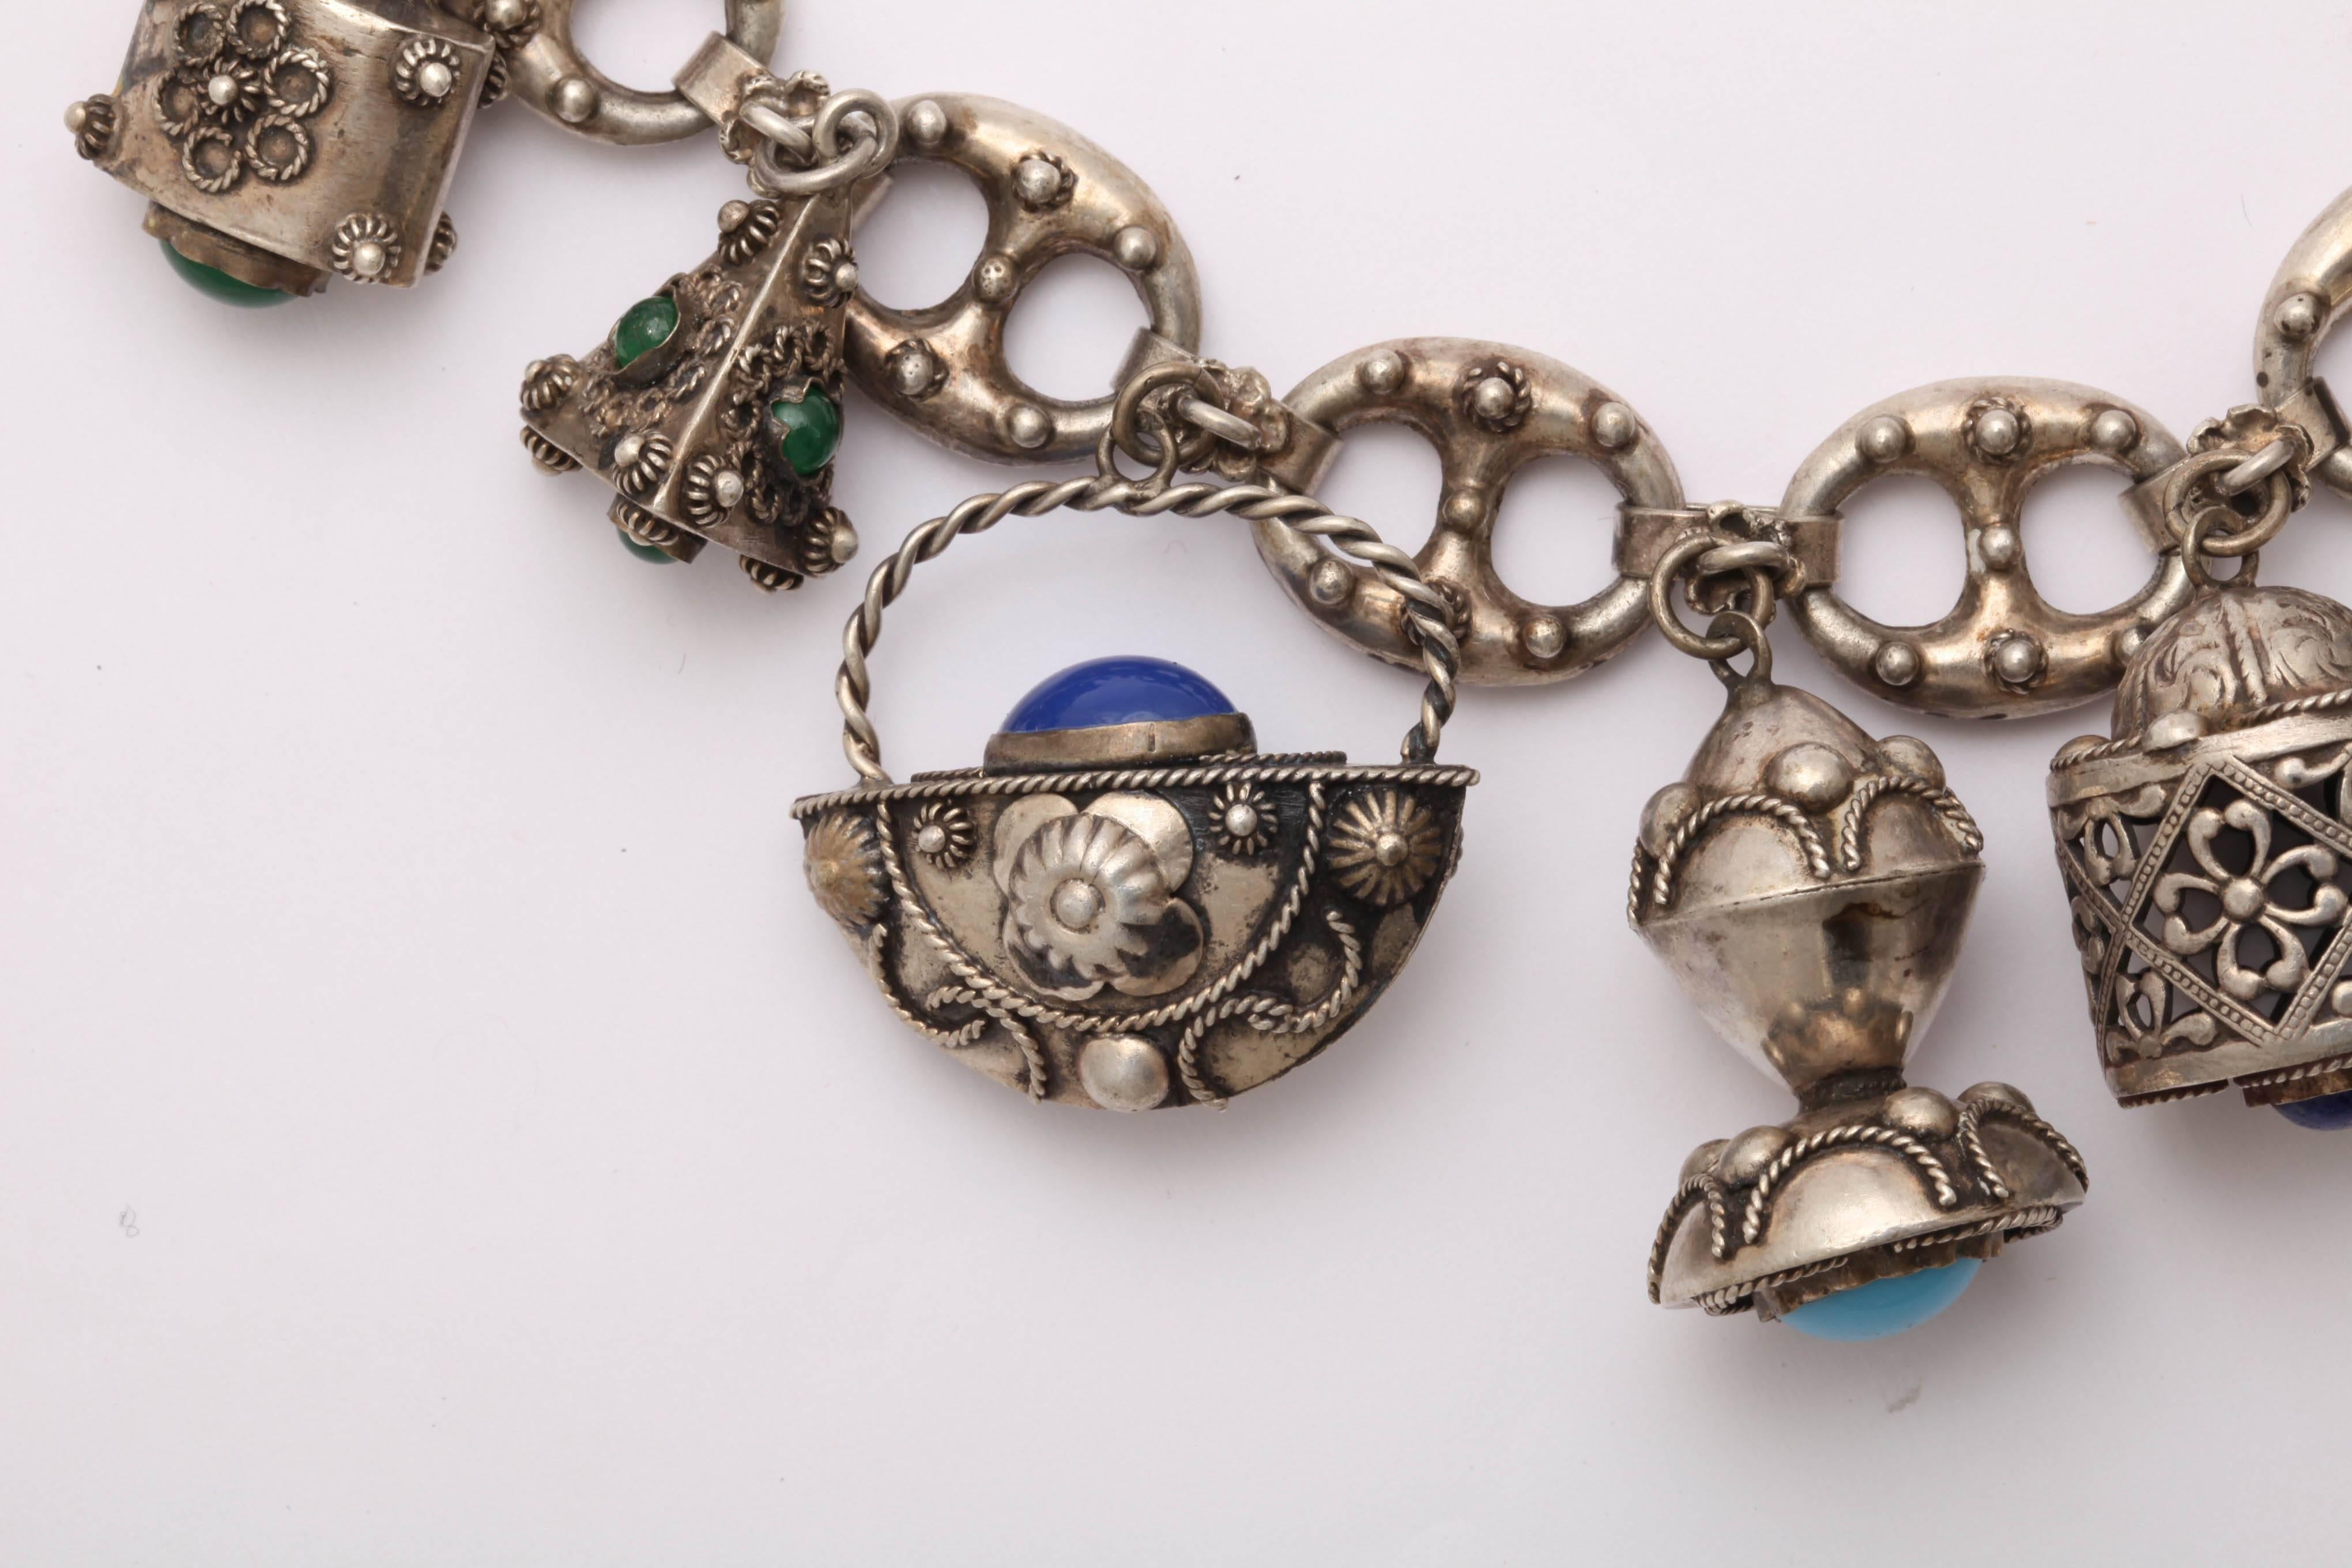 Lighthearted pleasure and sheer fun is packaged for you with the arrival of this chunky eight charm bracelet of silver and cabochon glass stones. I wore it this week to test how it makes me feel. It is more loved now than ever. It is a beautiful and